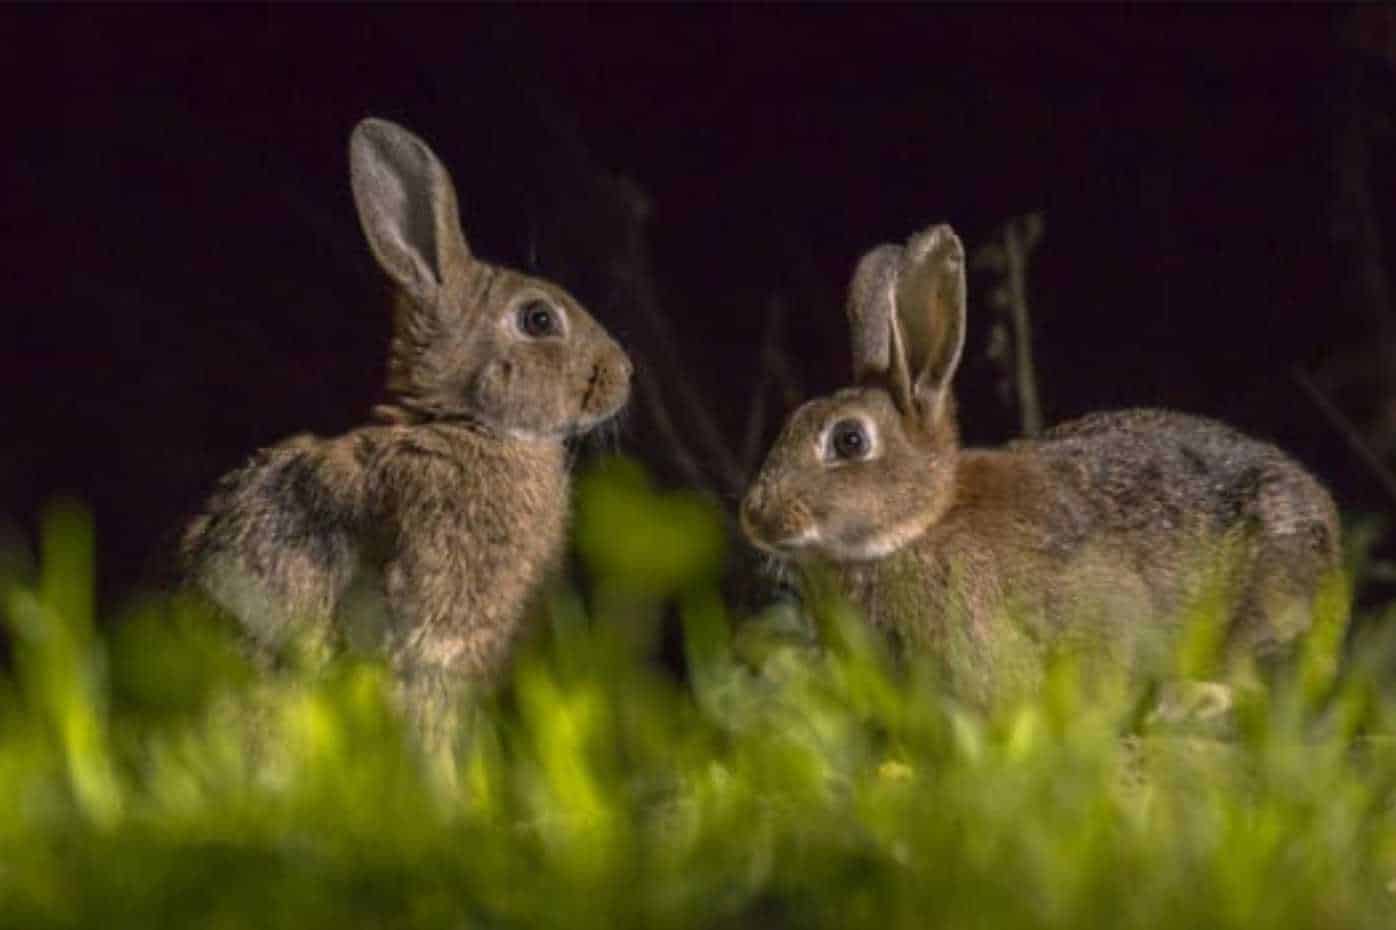 can bunnies see in the dark